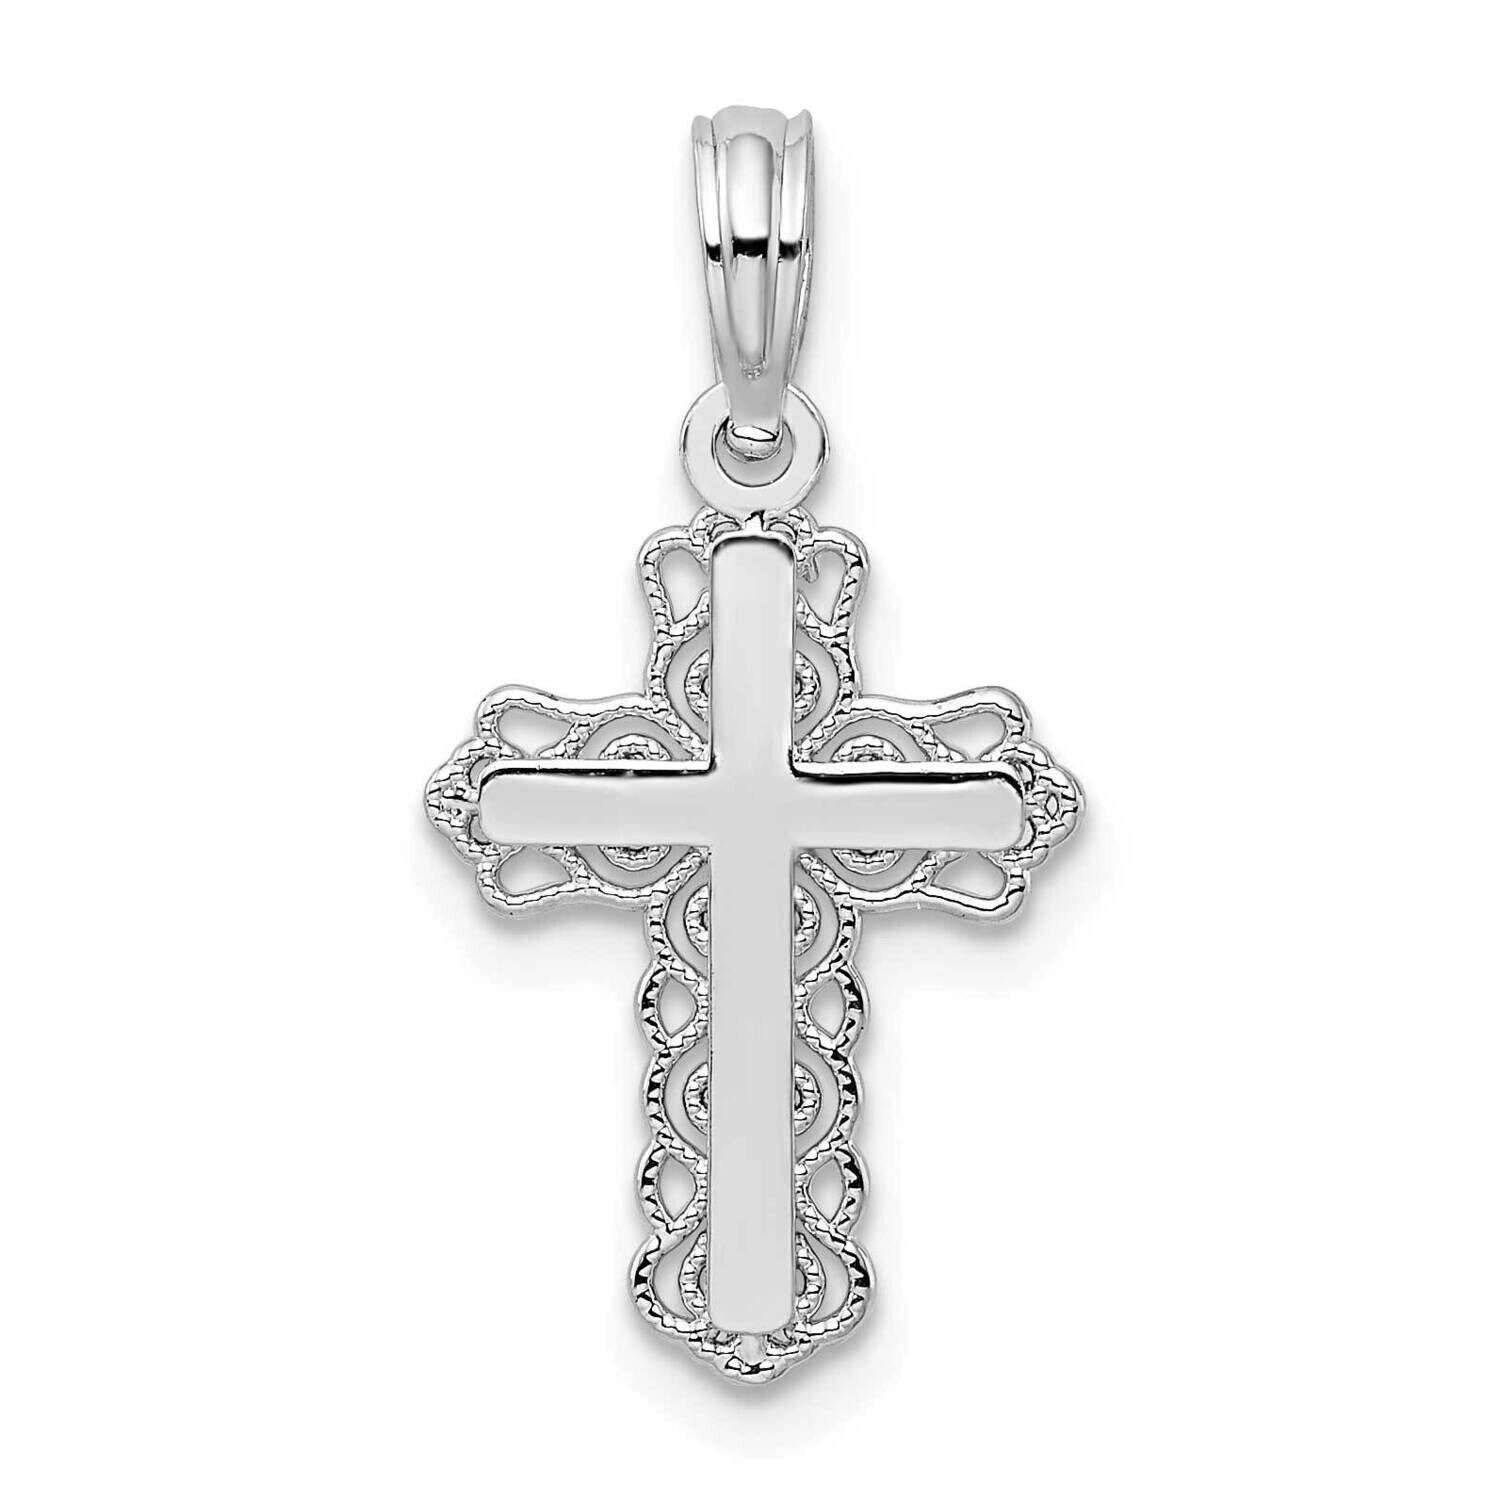 Lace Trim Cross Pendant Sterling Silver Polished QC10164